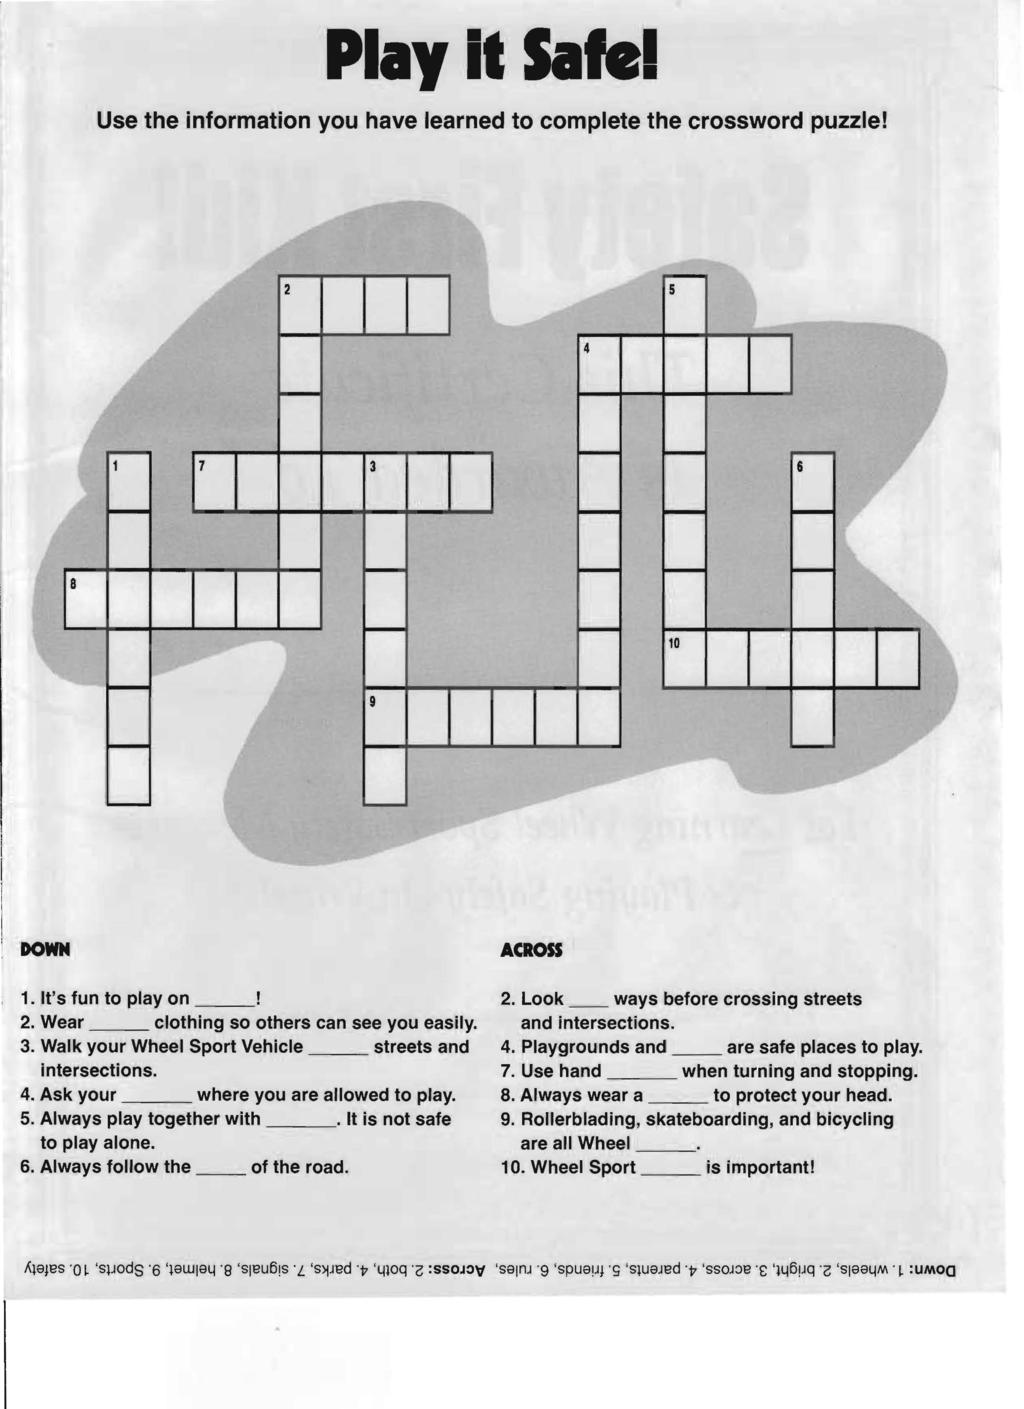 Play it Saki Use the information you have learned to complete the crossword puzzle! 5 4 3 8 10 9 DOWN 1.,It's fun to play on 2. Wear clothing so others can see you easily. 3. Walk your Wheel Sport Vehicle streets and intersections.